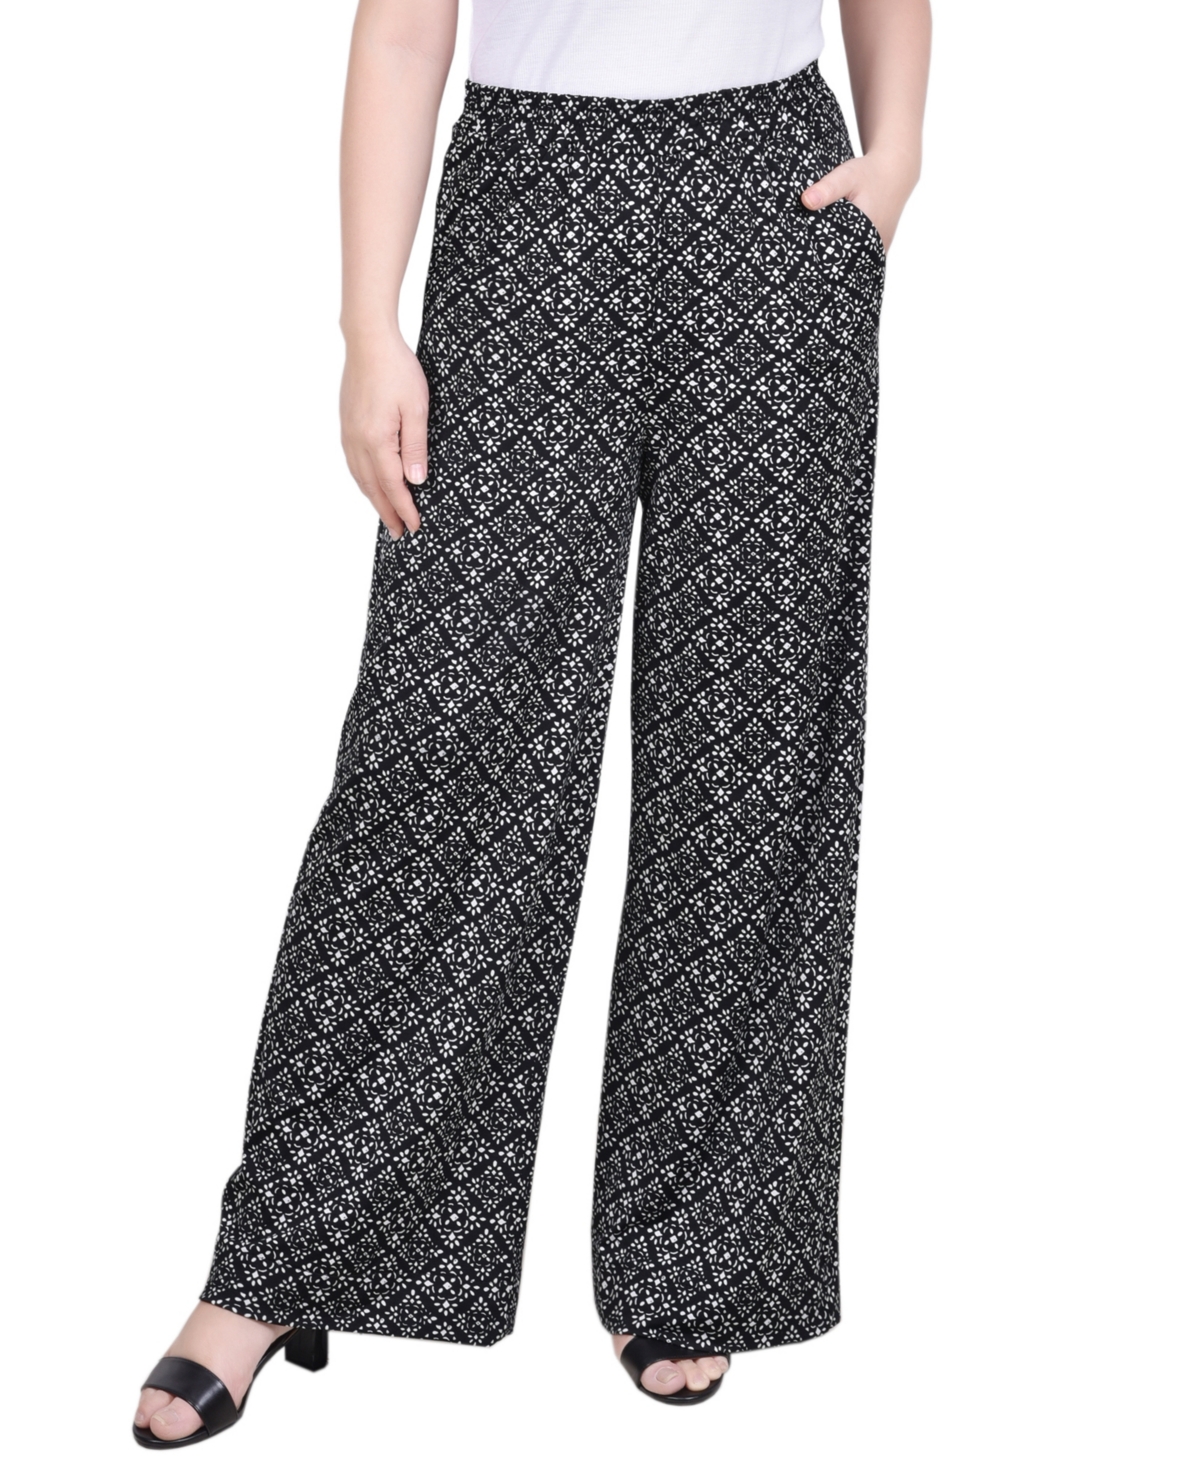 Ny Collection Petite Wide Leg Pull On Pants In Black White Geometric